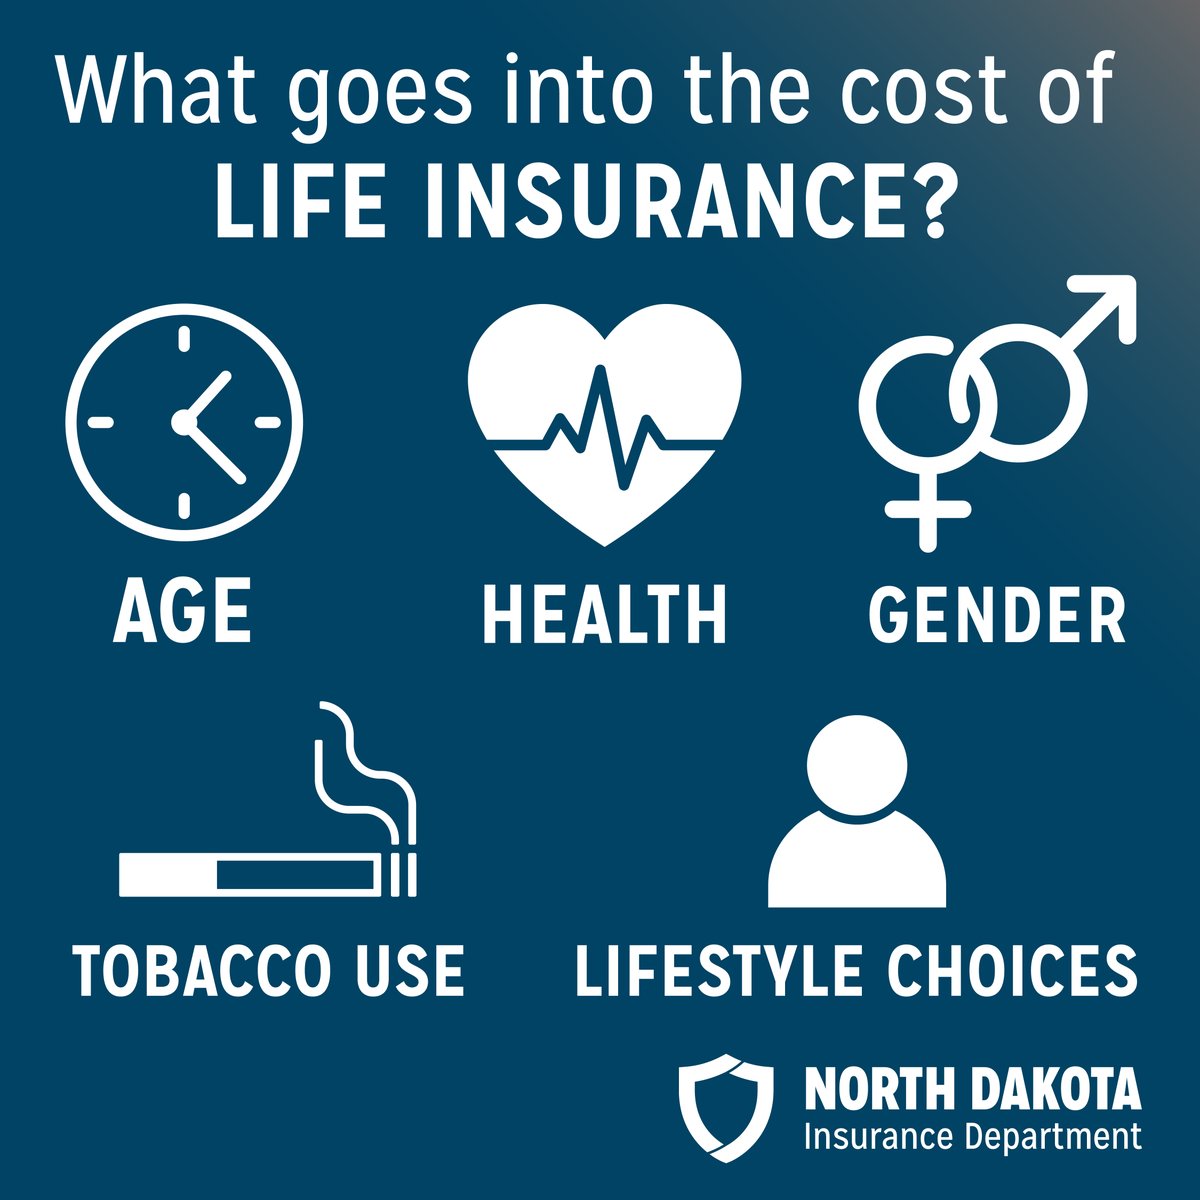 Life insurance can be a wise decision in being financially smart. During #FinancialLiteracyMonth, consider the factors that go into the cost of your premiums. Learn more about life insurance: bit.ly/3tyfVu8